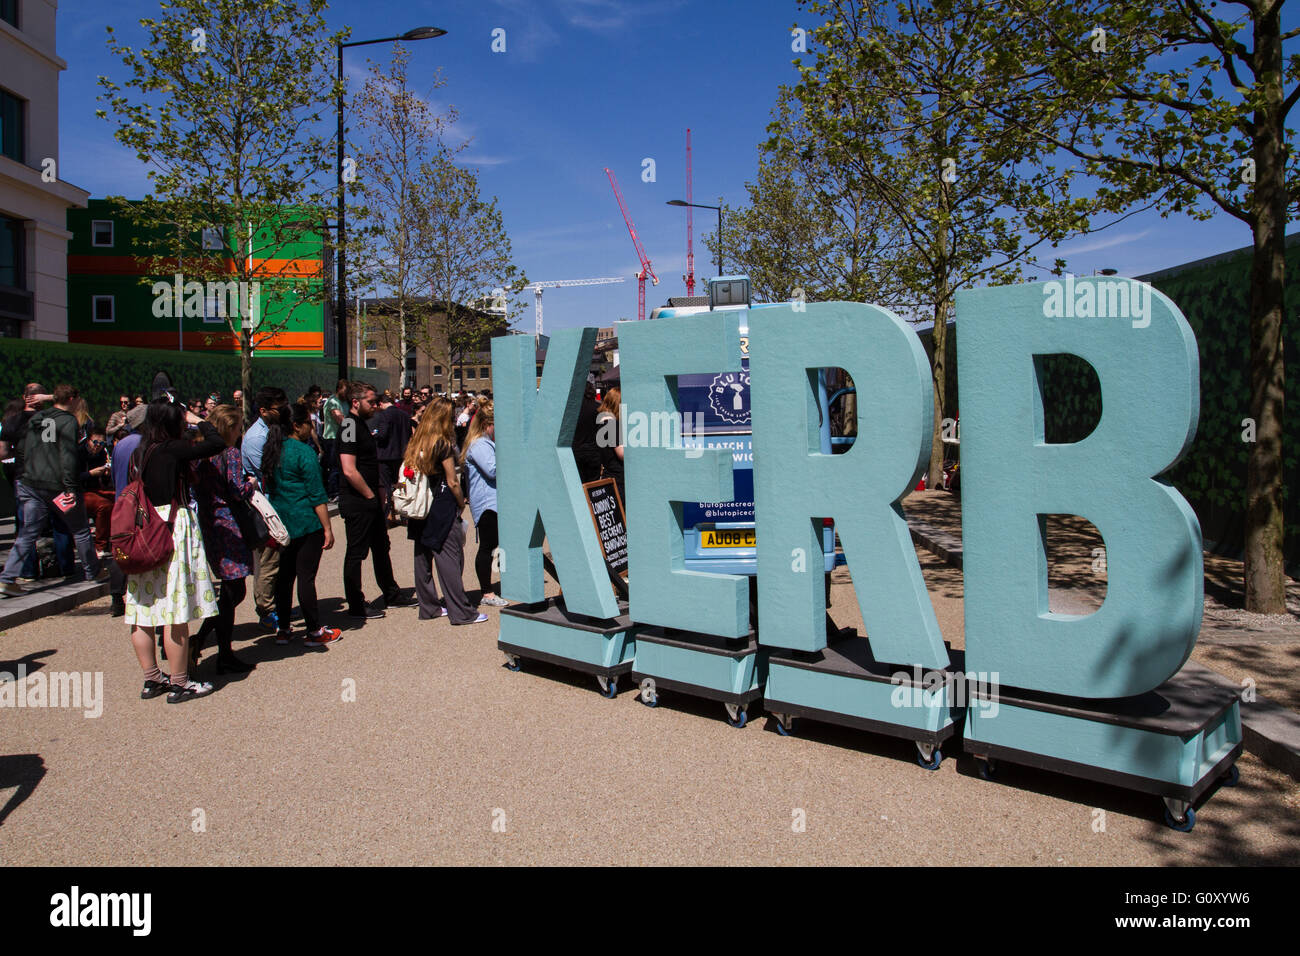 A long line of people queuing next to a large sign for food at a popular London street food market known as The Kerb. Stock Photo